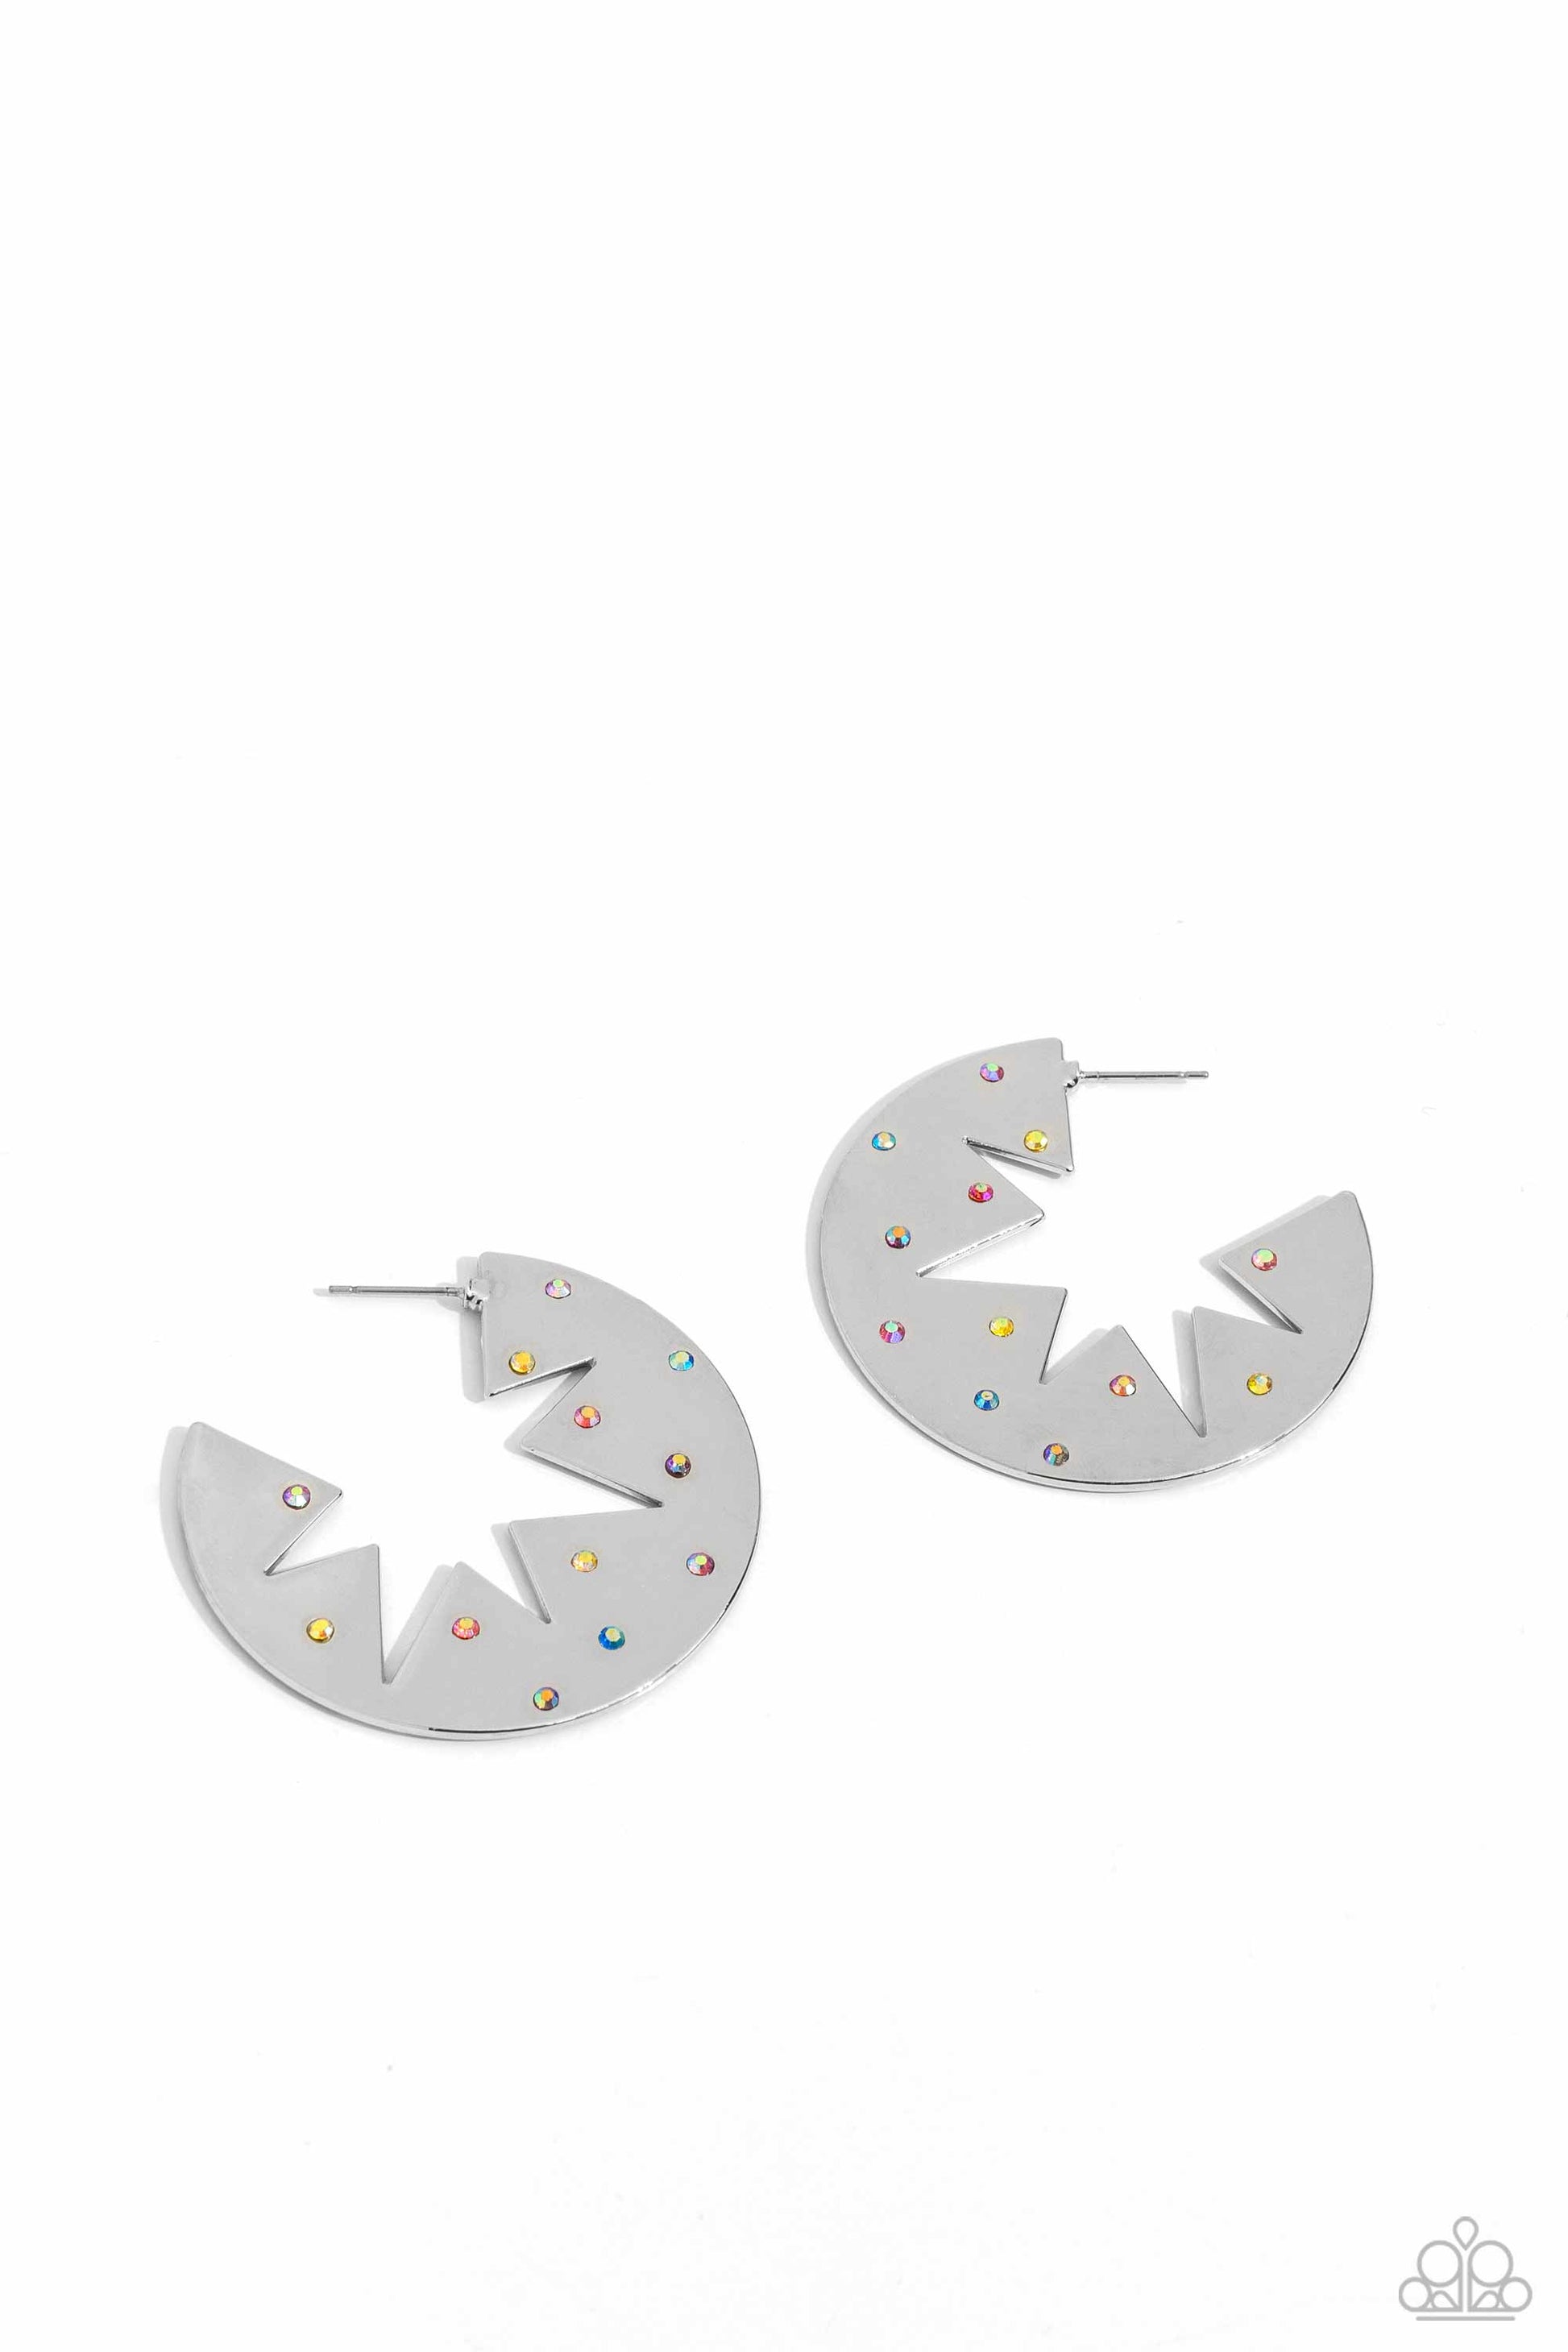 Paparazzi Accessories - Starry Sensation - Multi Hoop Earrings sporadically dotted with various multicolored and iridescent rhinestones, a three-dimensional star outline explodes from the center of a polished silver disc for an out-of-this-world centerpiece. Earring attaches to a standard post fitting. Hoop measures approximately 1 3/4" in diameter. Due to its prismatic palette, color may vary.  Sold as one pair of hoop earrings.